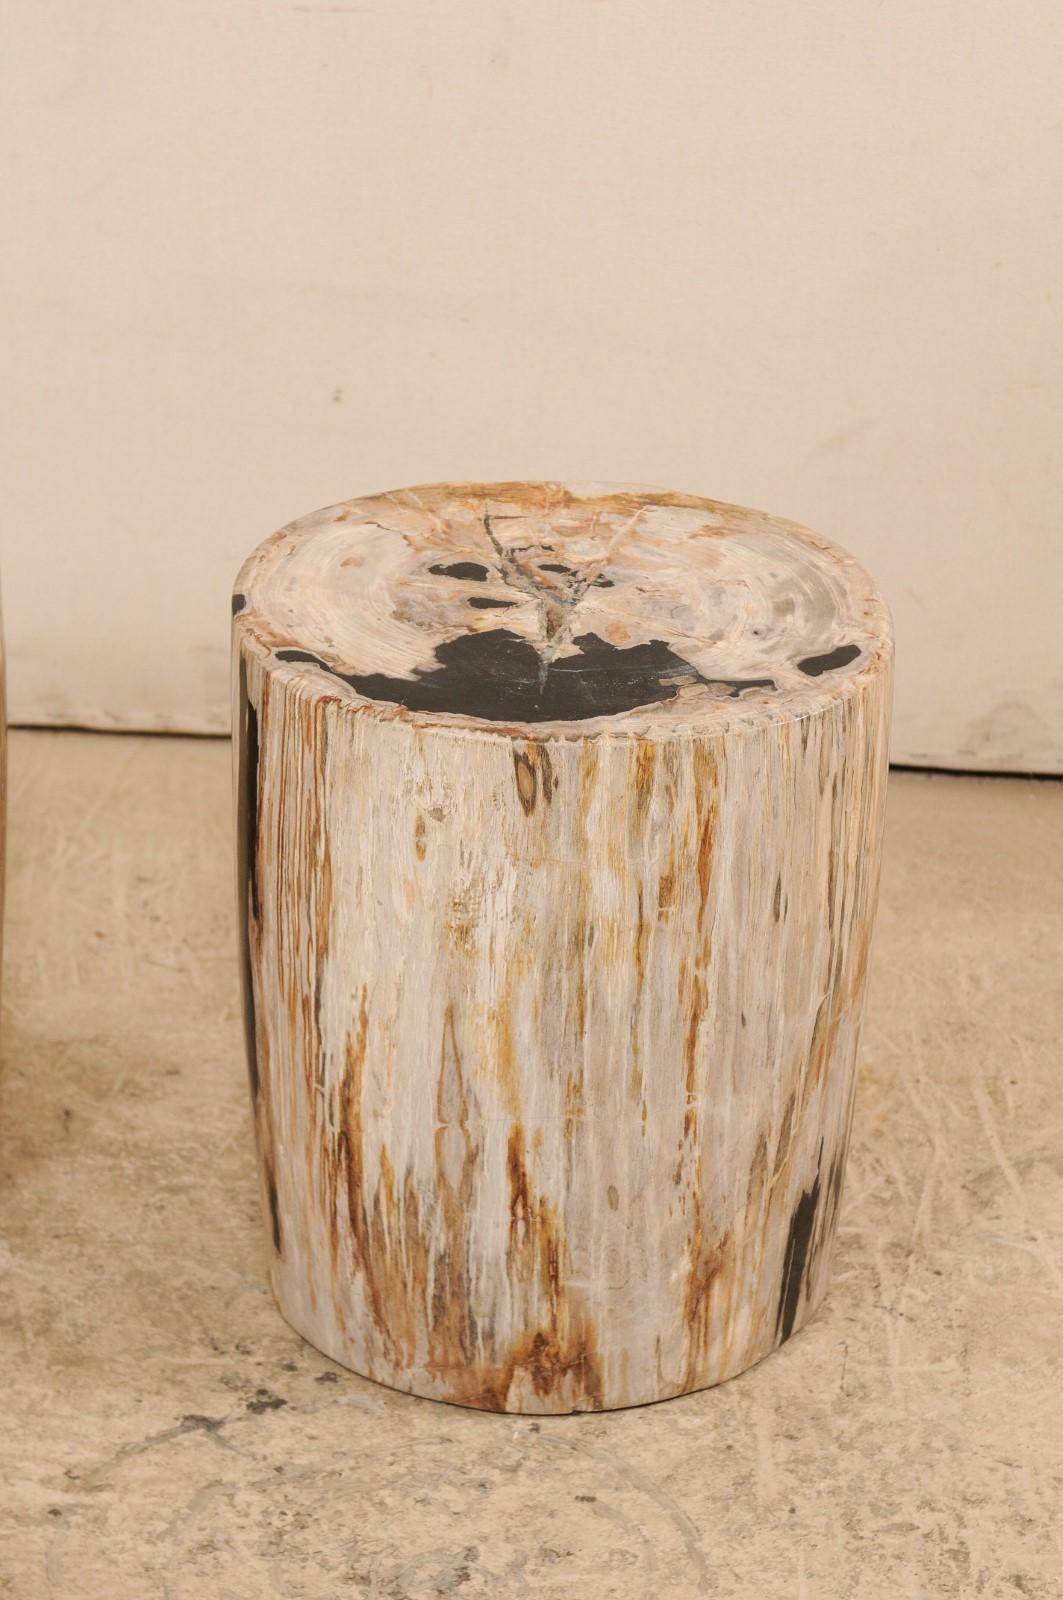 Pair of Petrified Wood Side Tables or Stools in Beautiful Cream and Black Colors 1